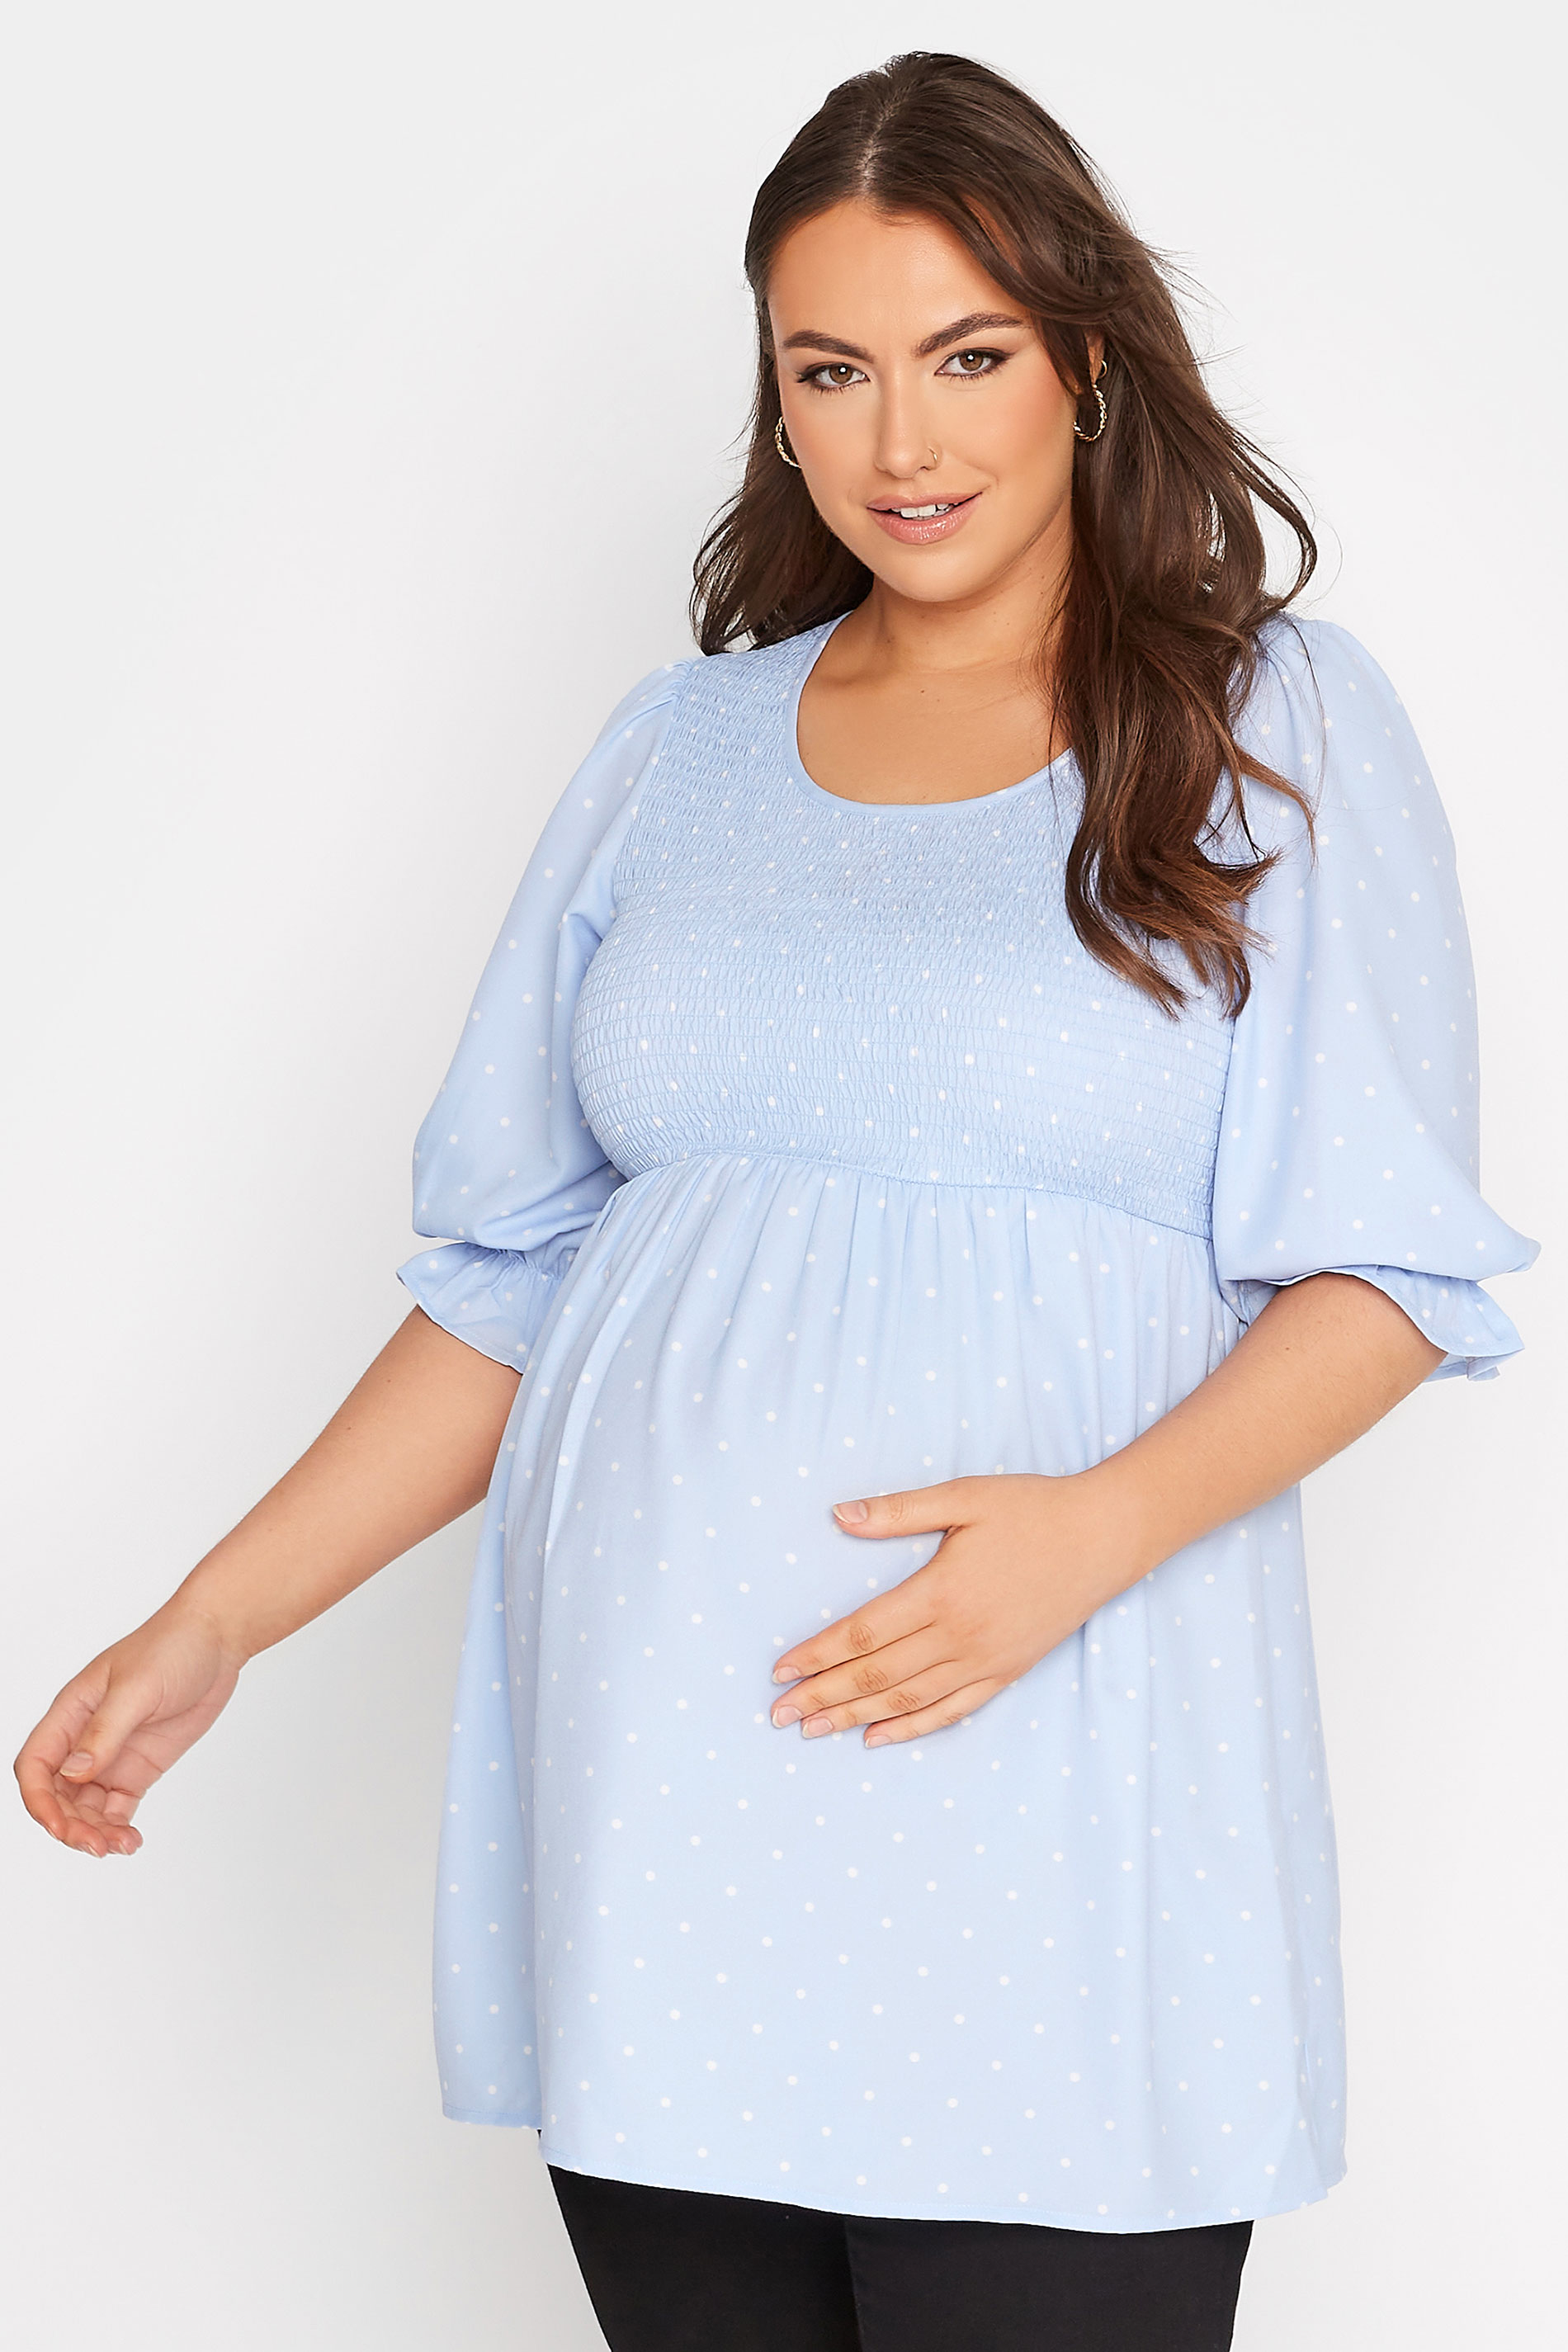 BUMP IT UP MATERNITY Plus Size Light Blue Polka Dot Shirred Top | Yours Clothing 1